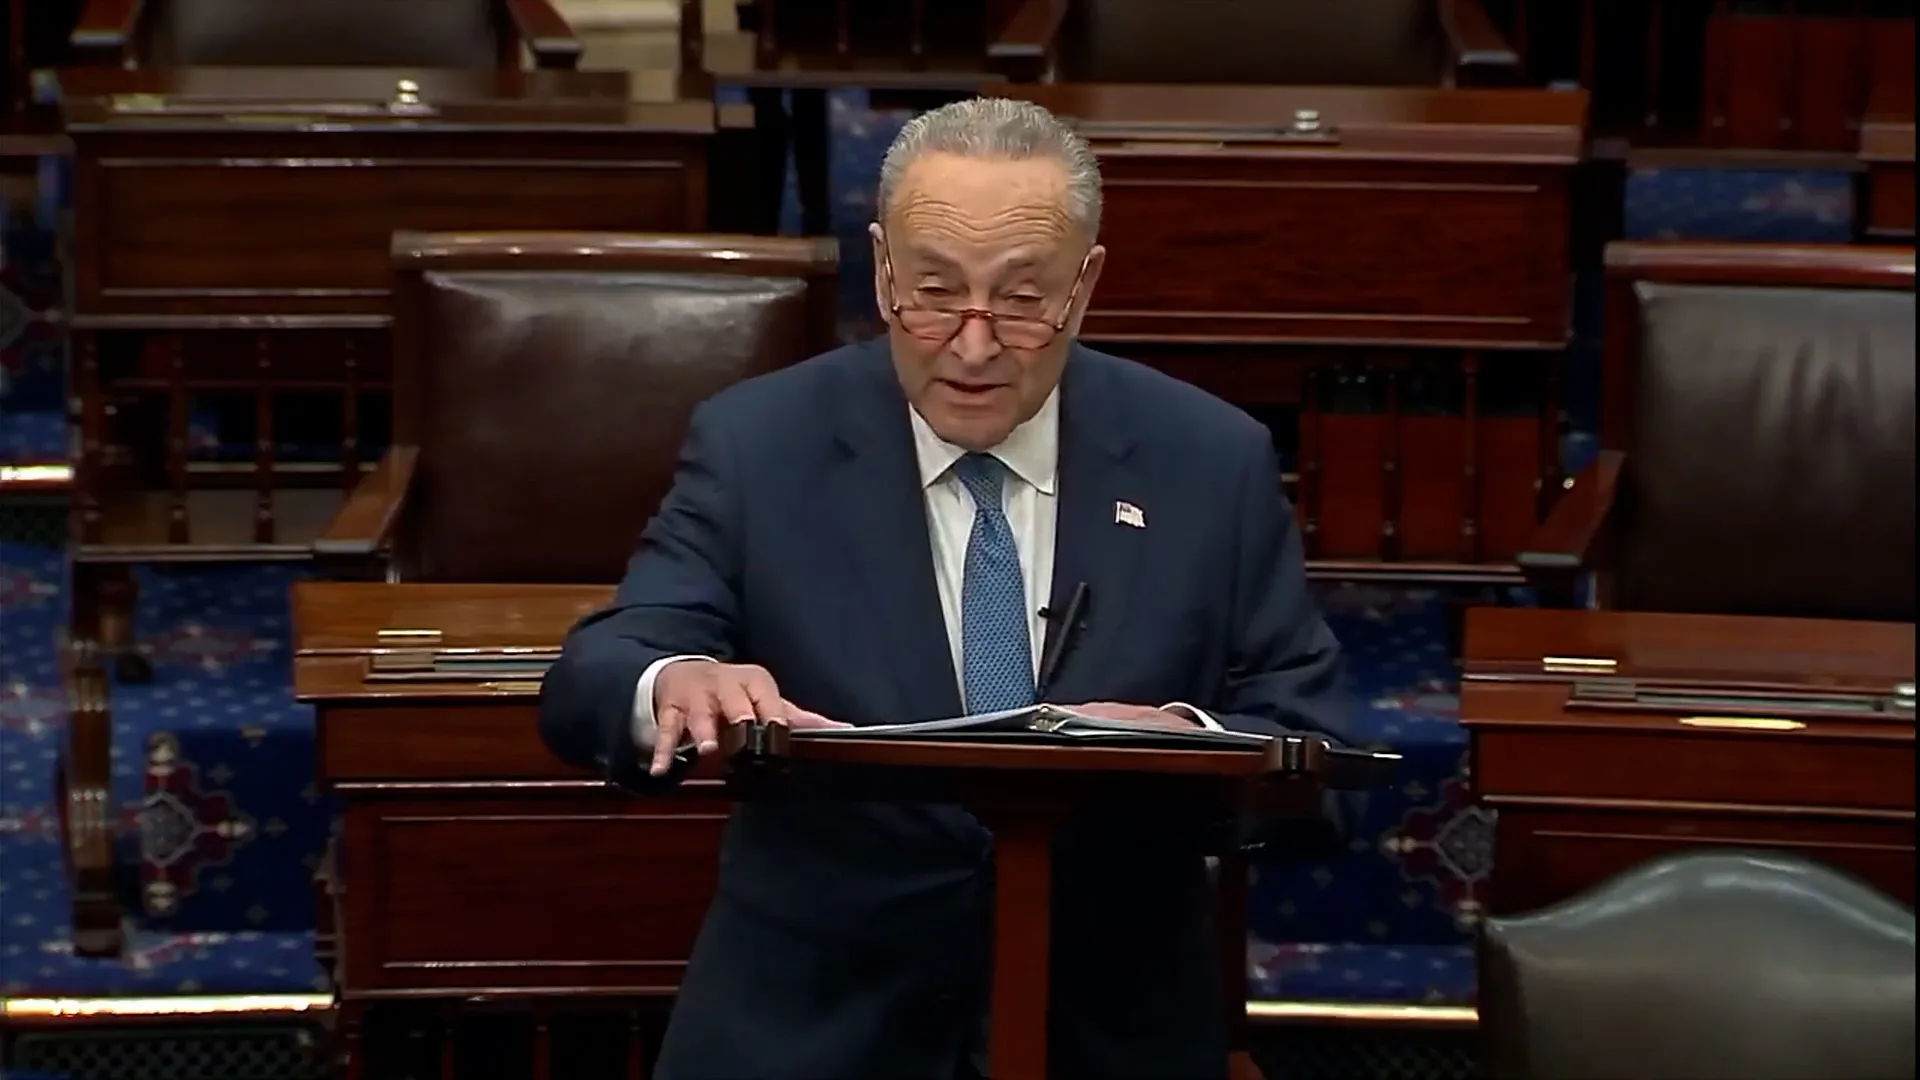 In Personal and Passionate Floor Speech, Schumer Warns Against Rise in Antisemitism